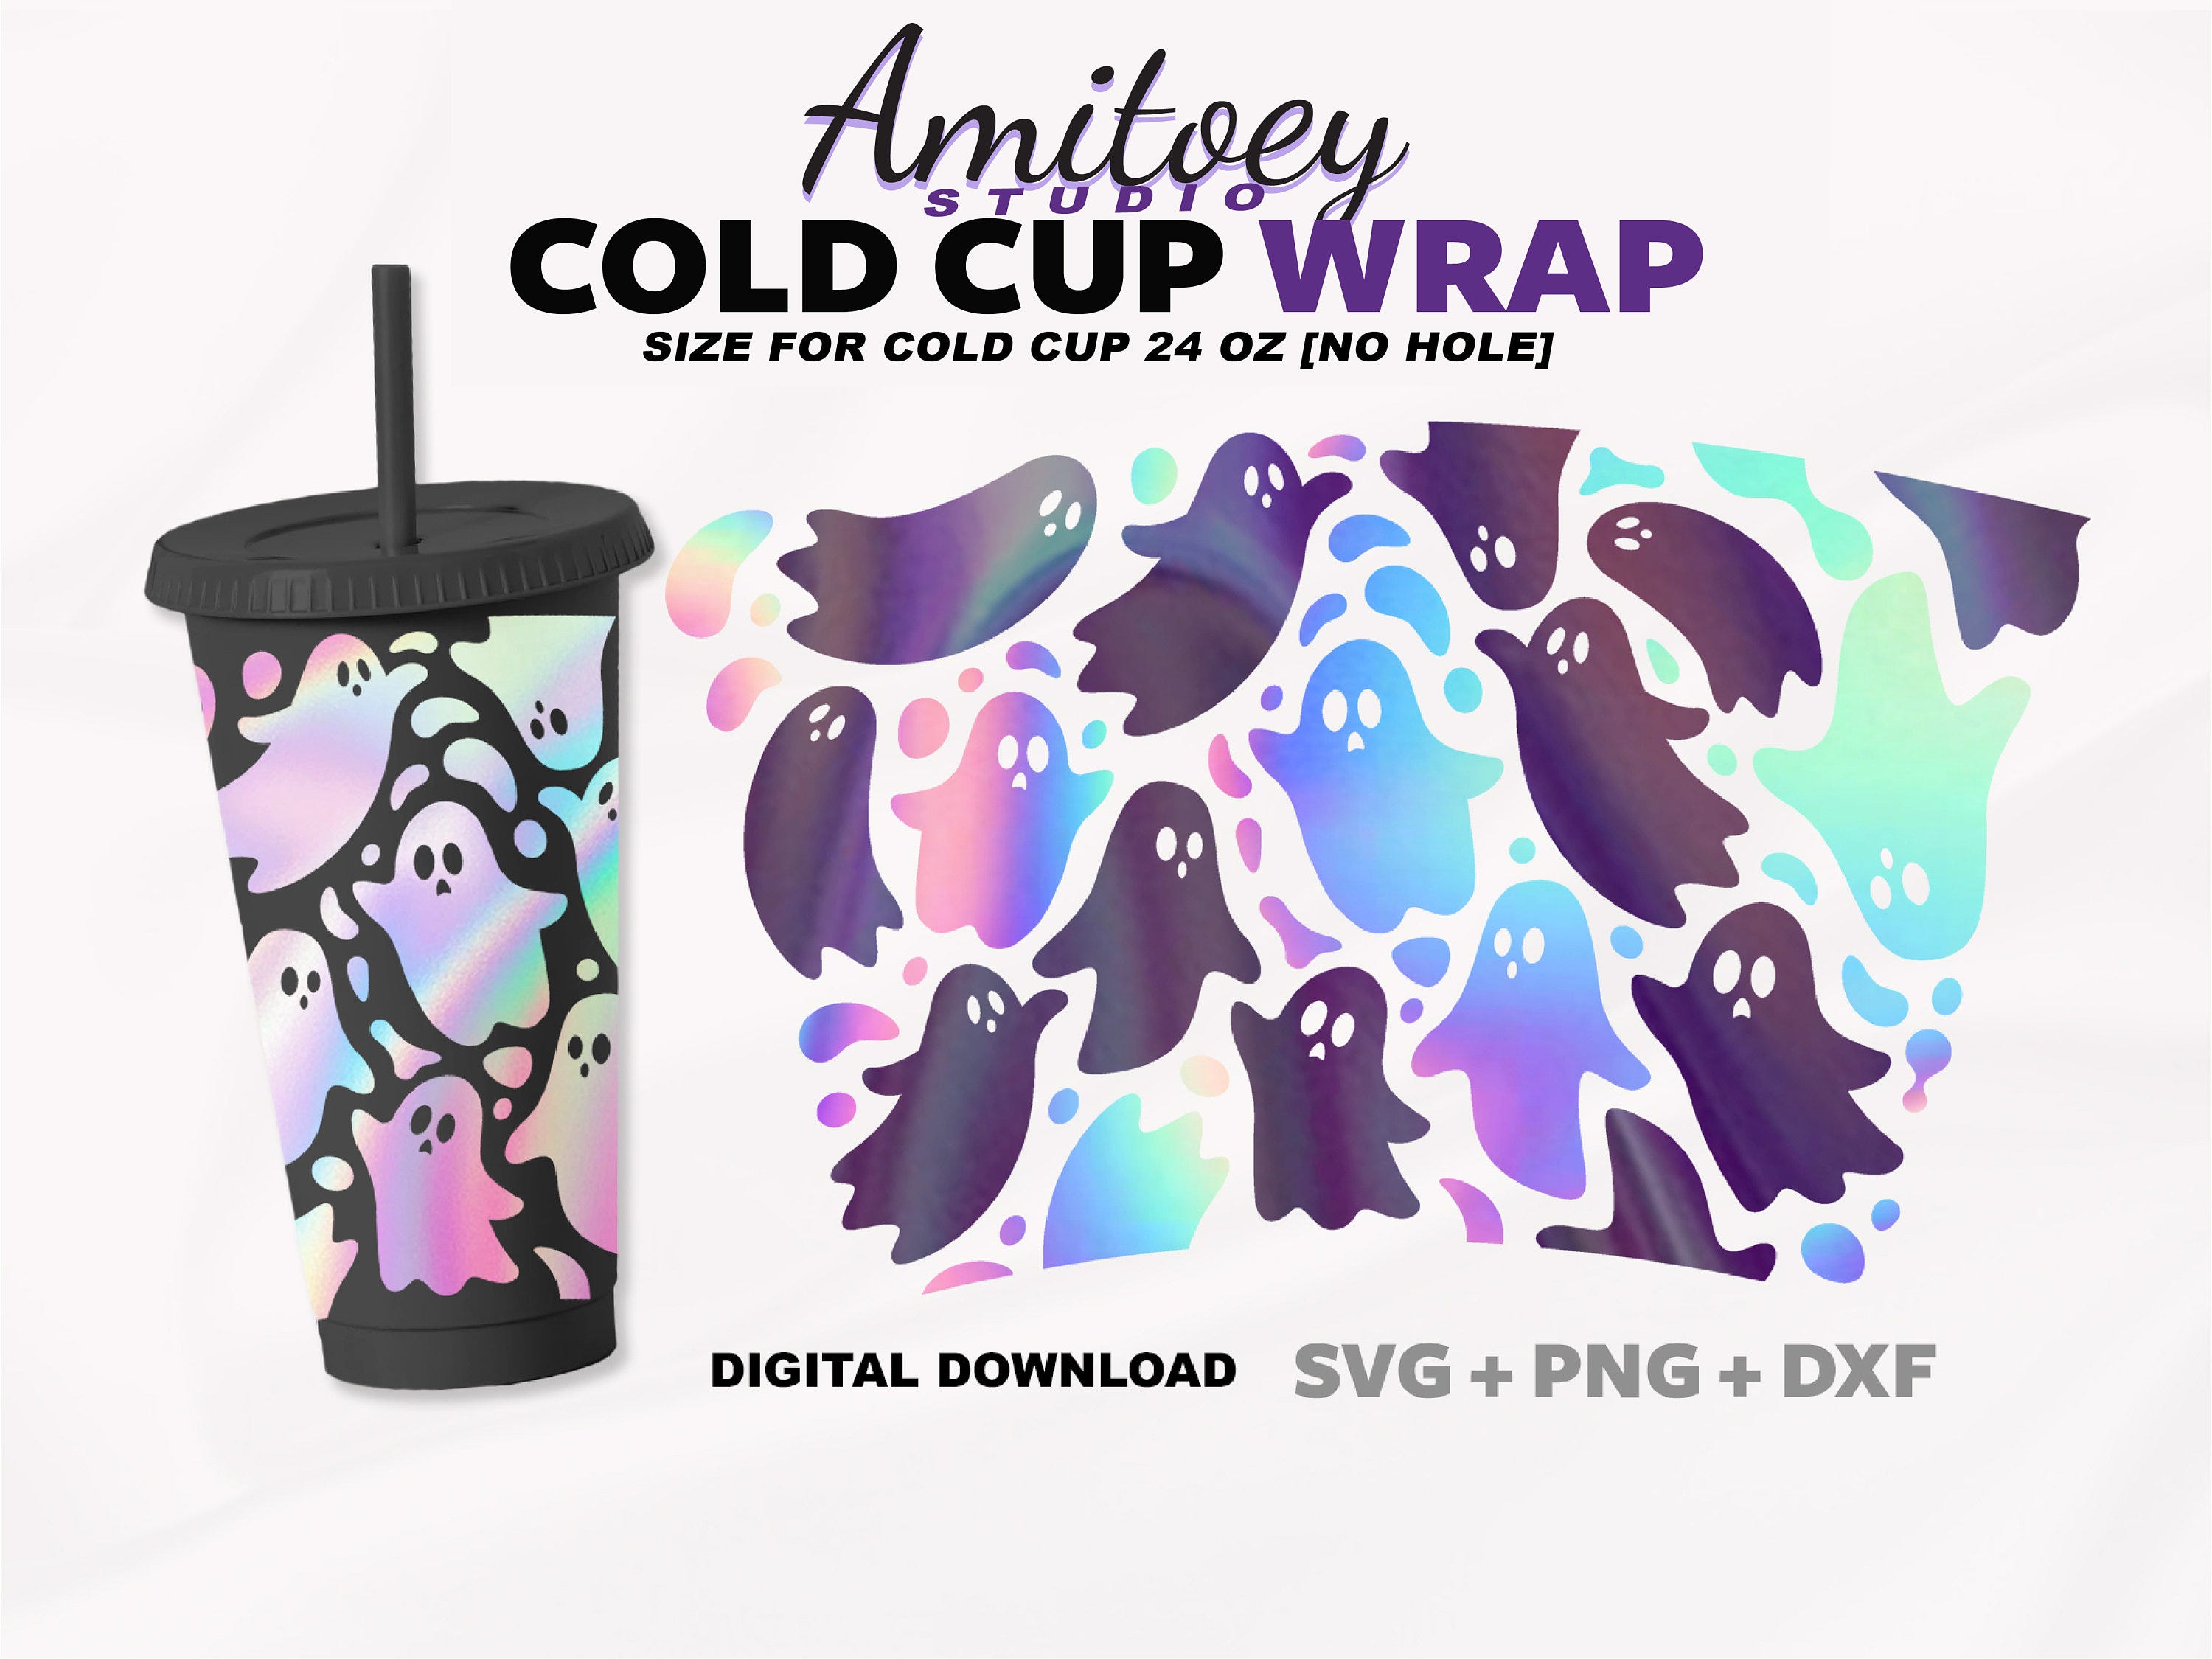 Ghost Halloween [No Hole] SVG Full Wrap, Ghost Magic Happy Halloween for Cold Cup 24 Oz | SVG, PNG, Dxf Files Digital Download.